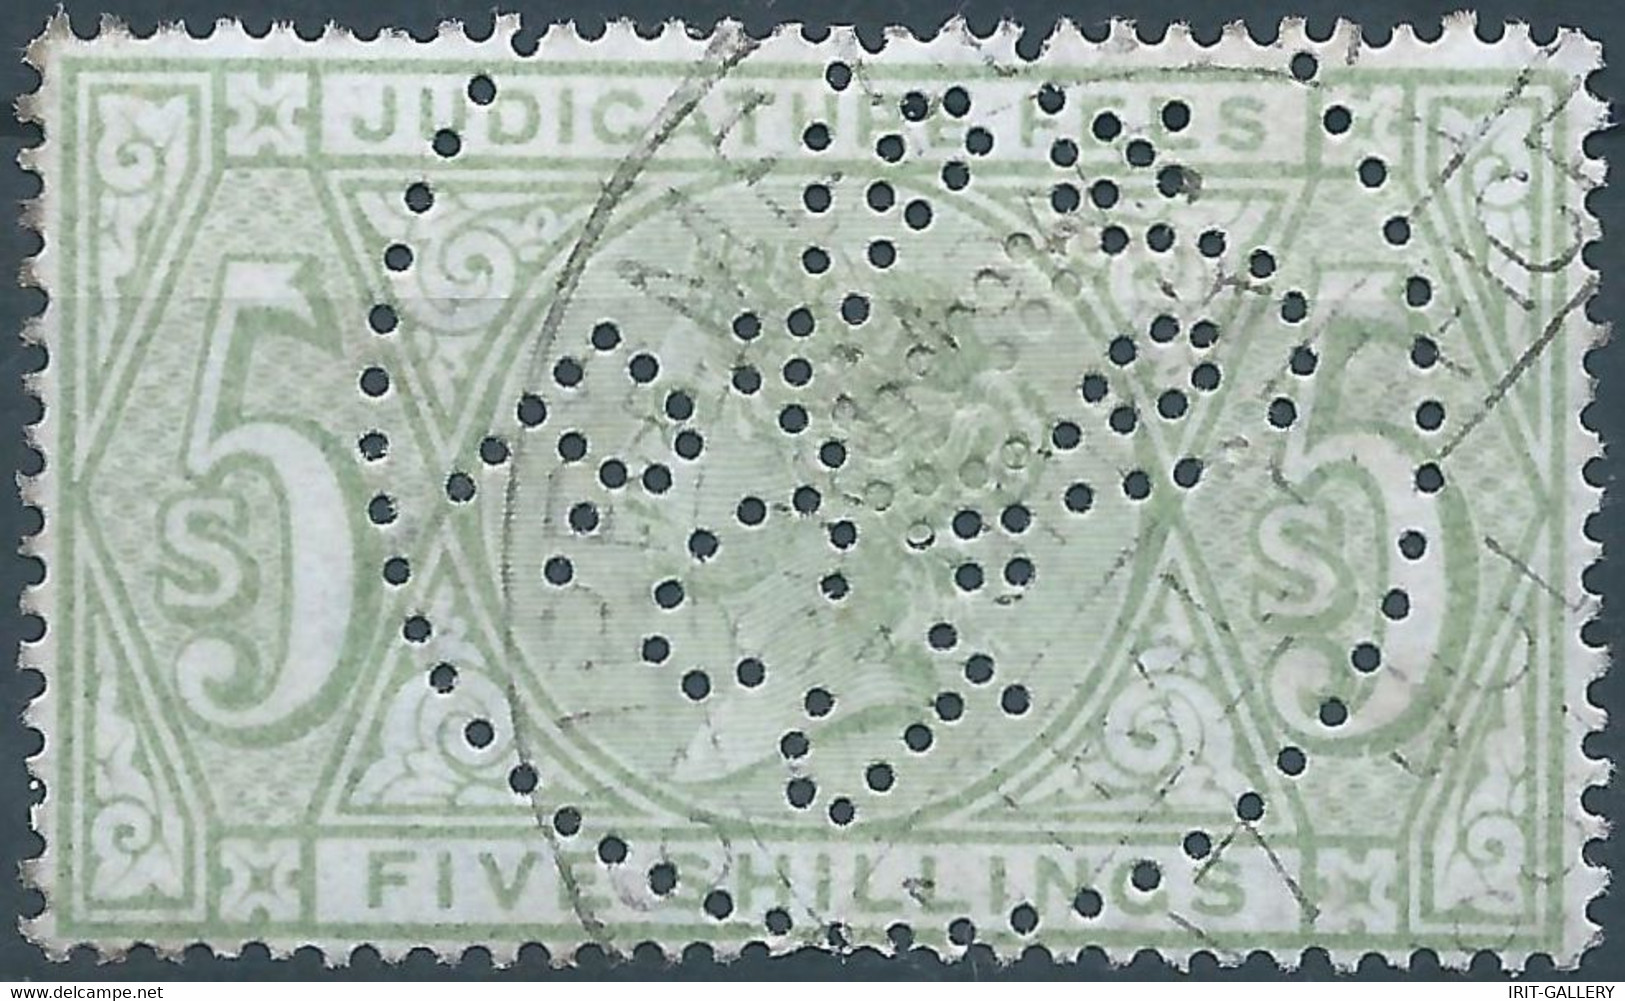 Great Britain-ENGLAND,Queen Victoria,1870-1800 Revenue Stamp Tax Fiscal,JUDICATURE FEES,5 Shillings,PERFIN - Used - Fiscaux